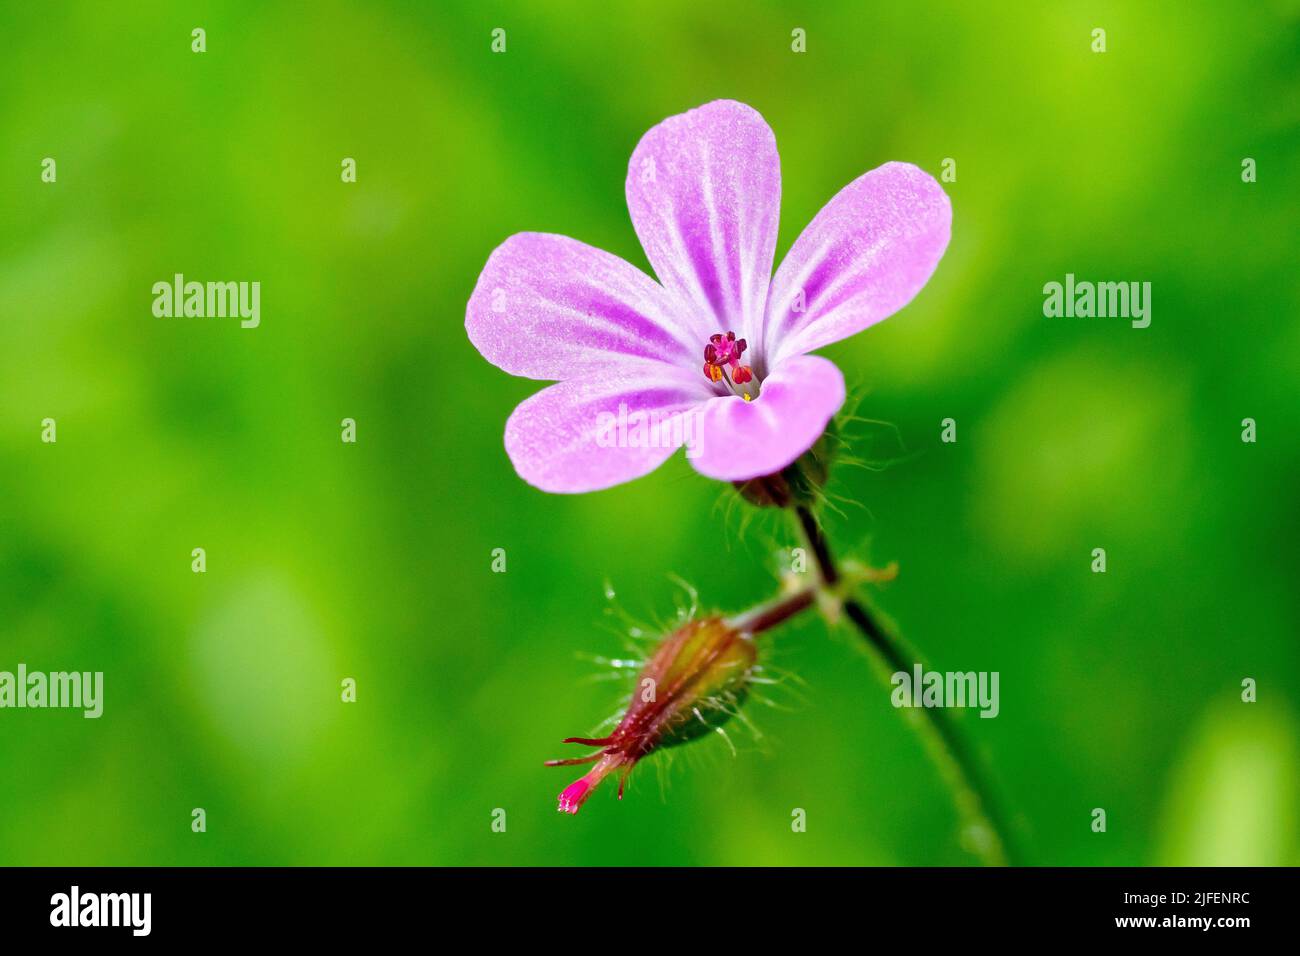 Herb Robert (geranium robertianum), close up of a single flower of the small woodland plant against a out of focus green background. Stock Photo